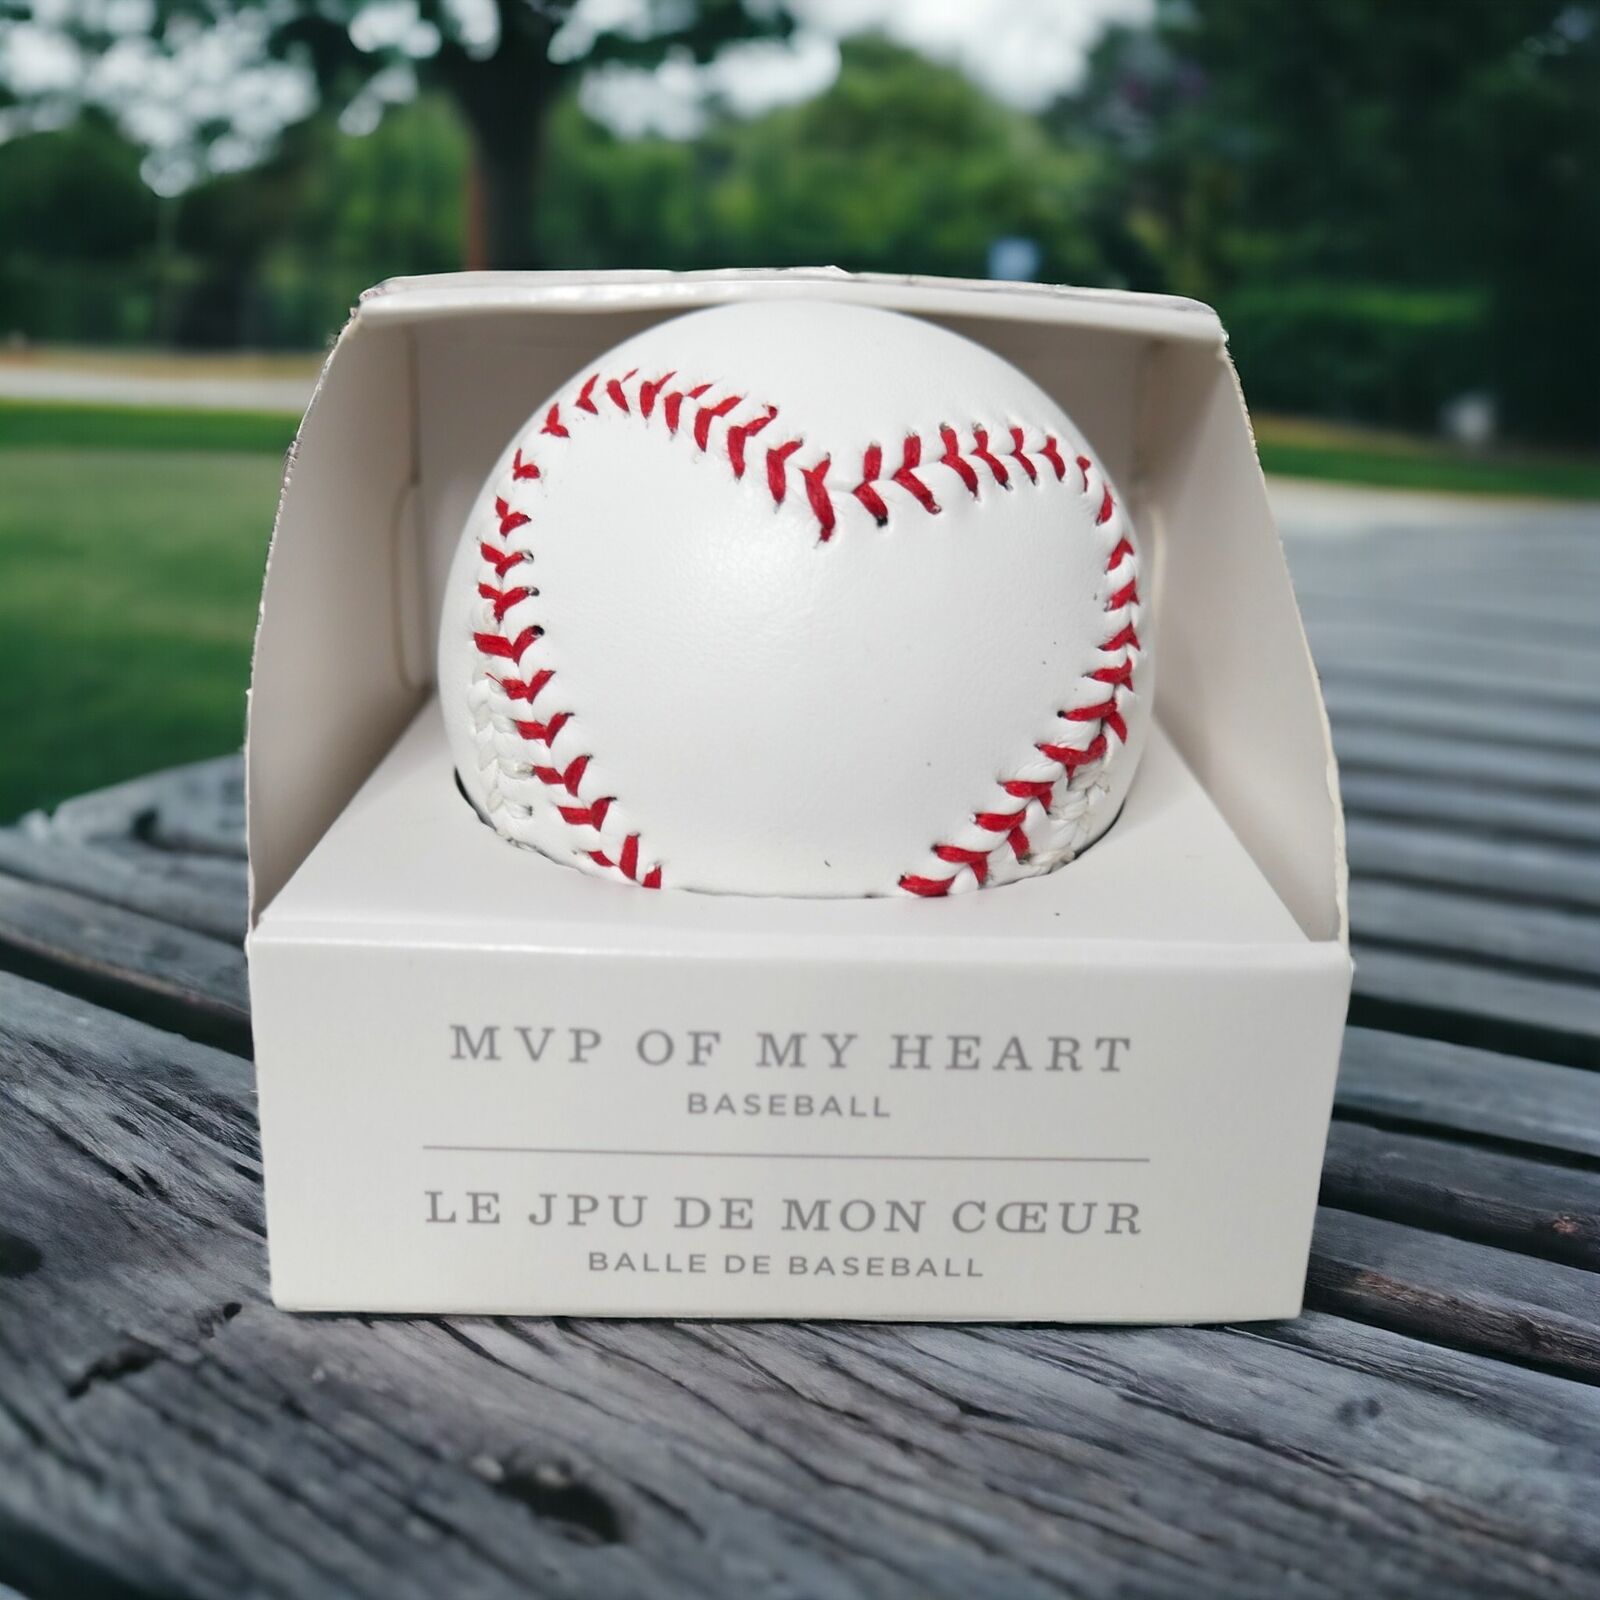 MVP OF MY HEART Stitched BASEBALL Player Hallmark Easter Basket Gift NEW IN BOX